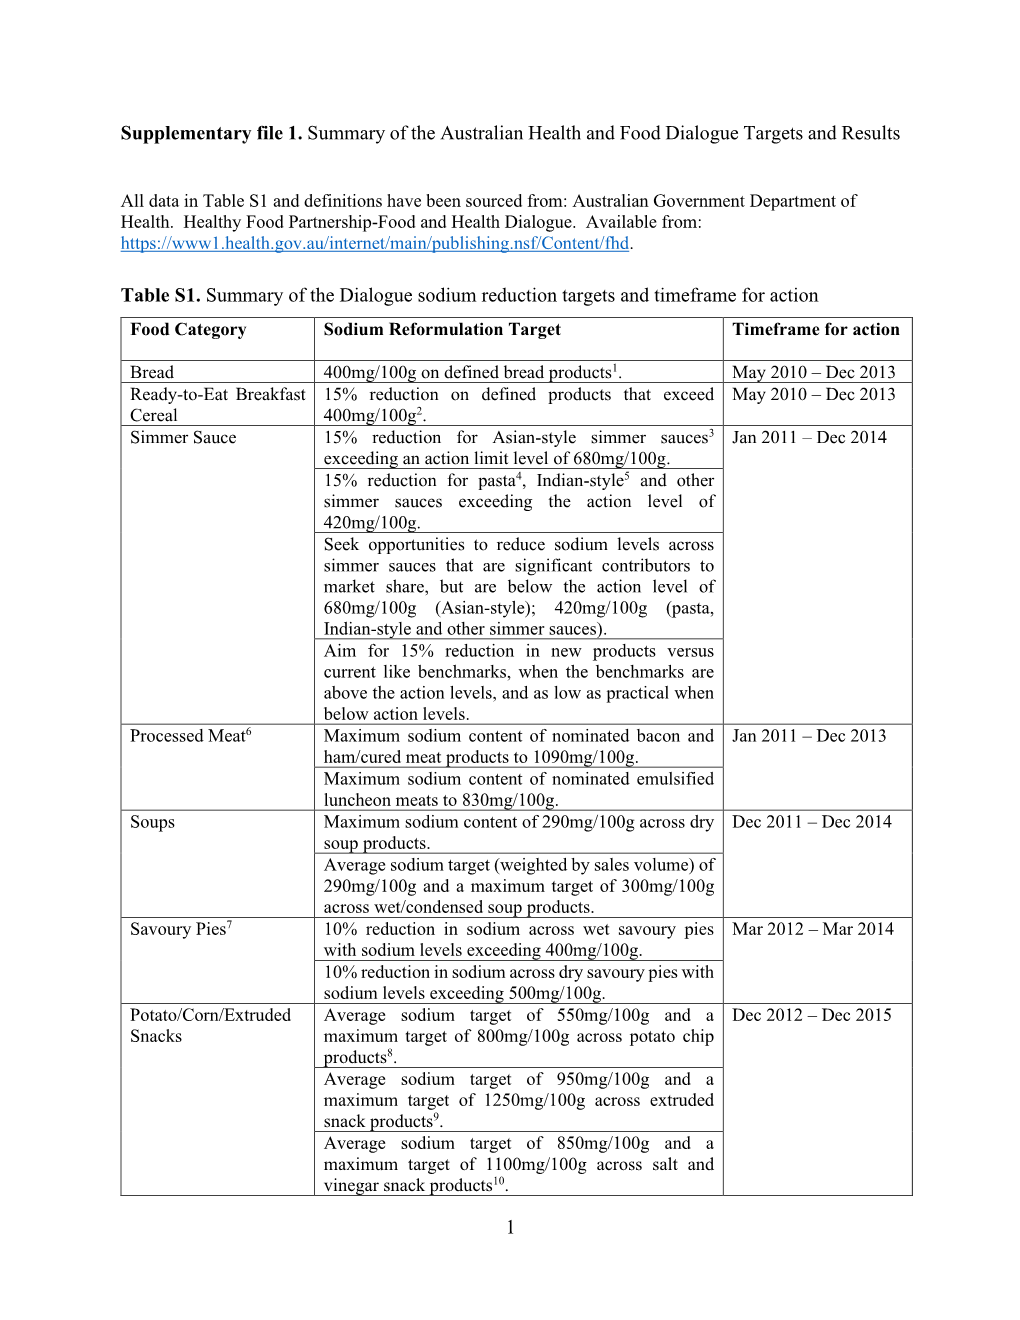 1 Supplementary File 1. Summary of the Australian Health and Food Dialogue Targets and Results Table S1. Summary of the Dialogue